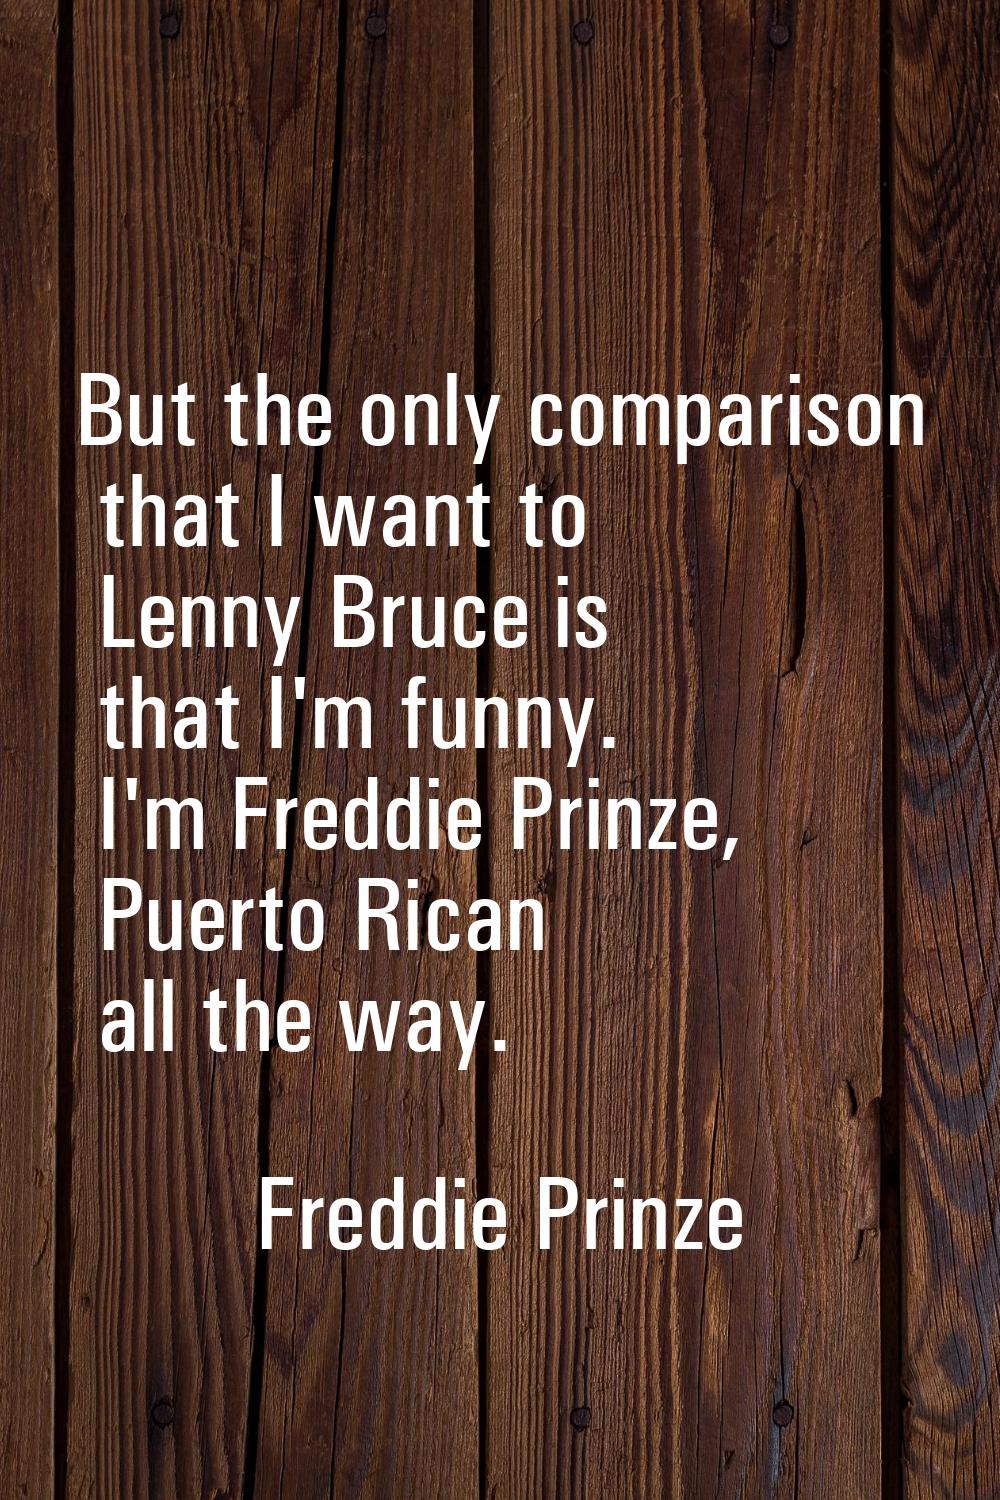 But the only comparison that I want to Lenny Bruce is that I'm funny. I'm Freddie Prinze, Puerto Ri